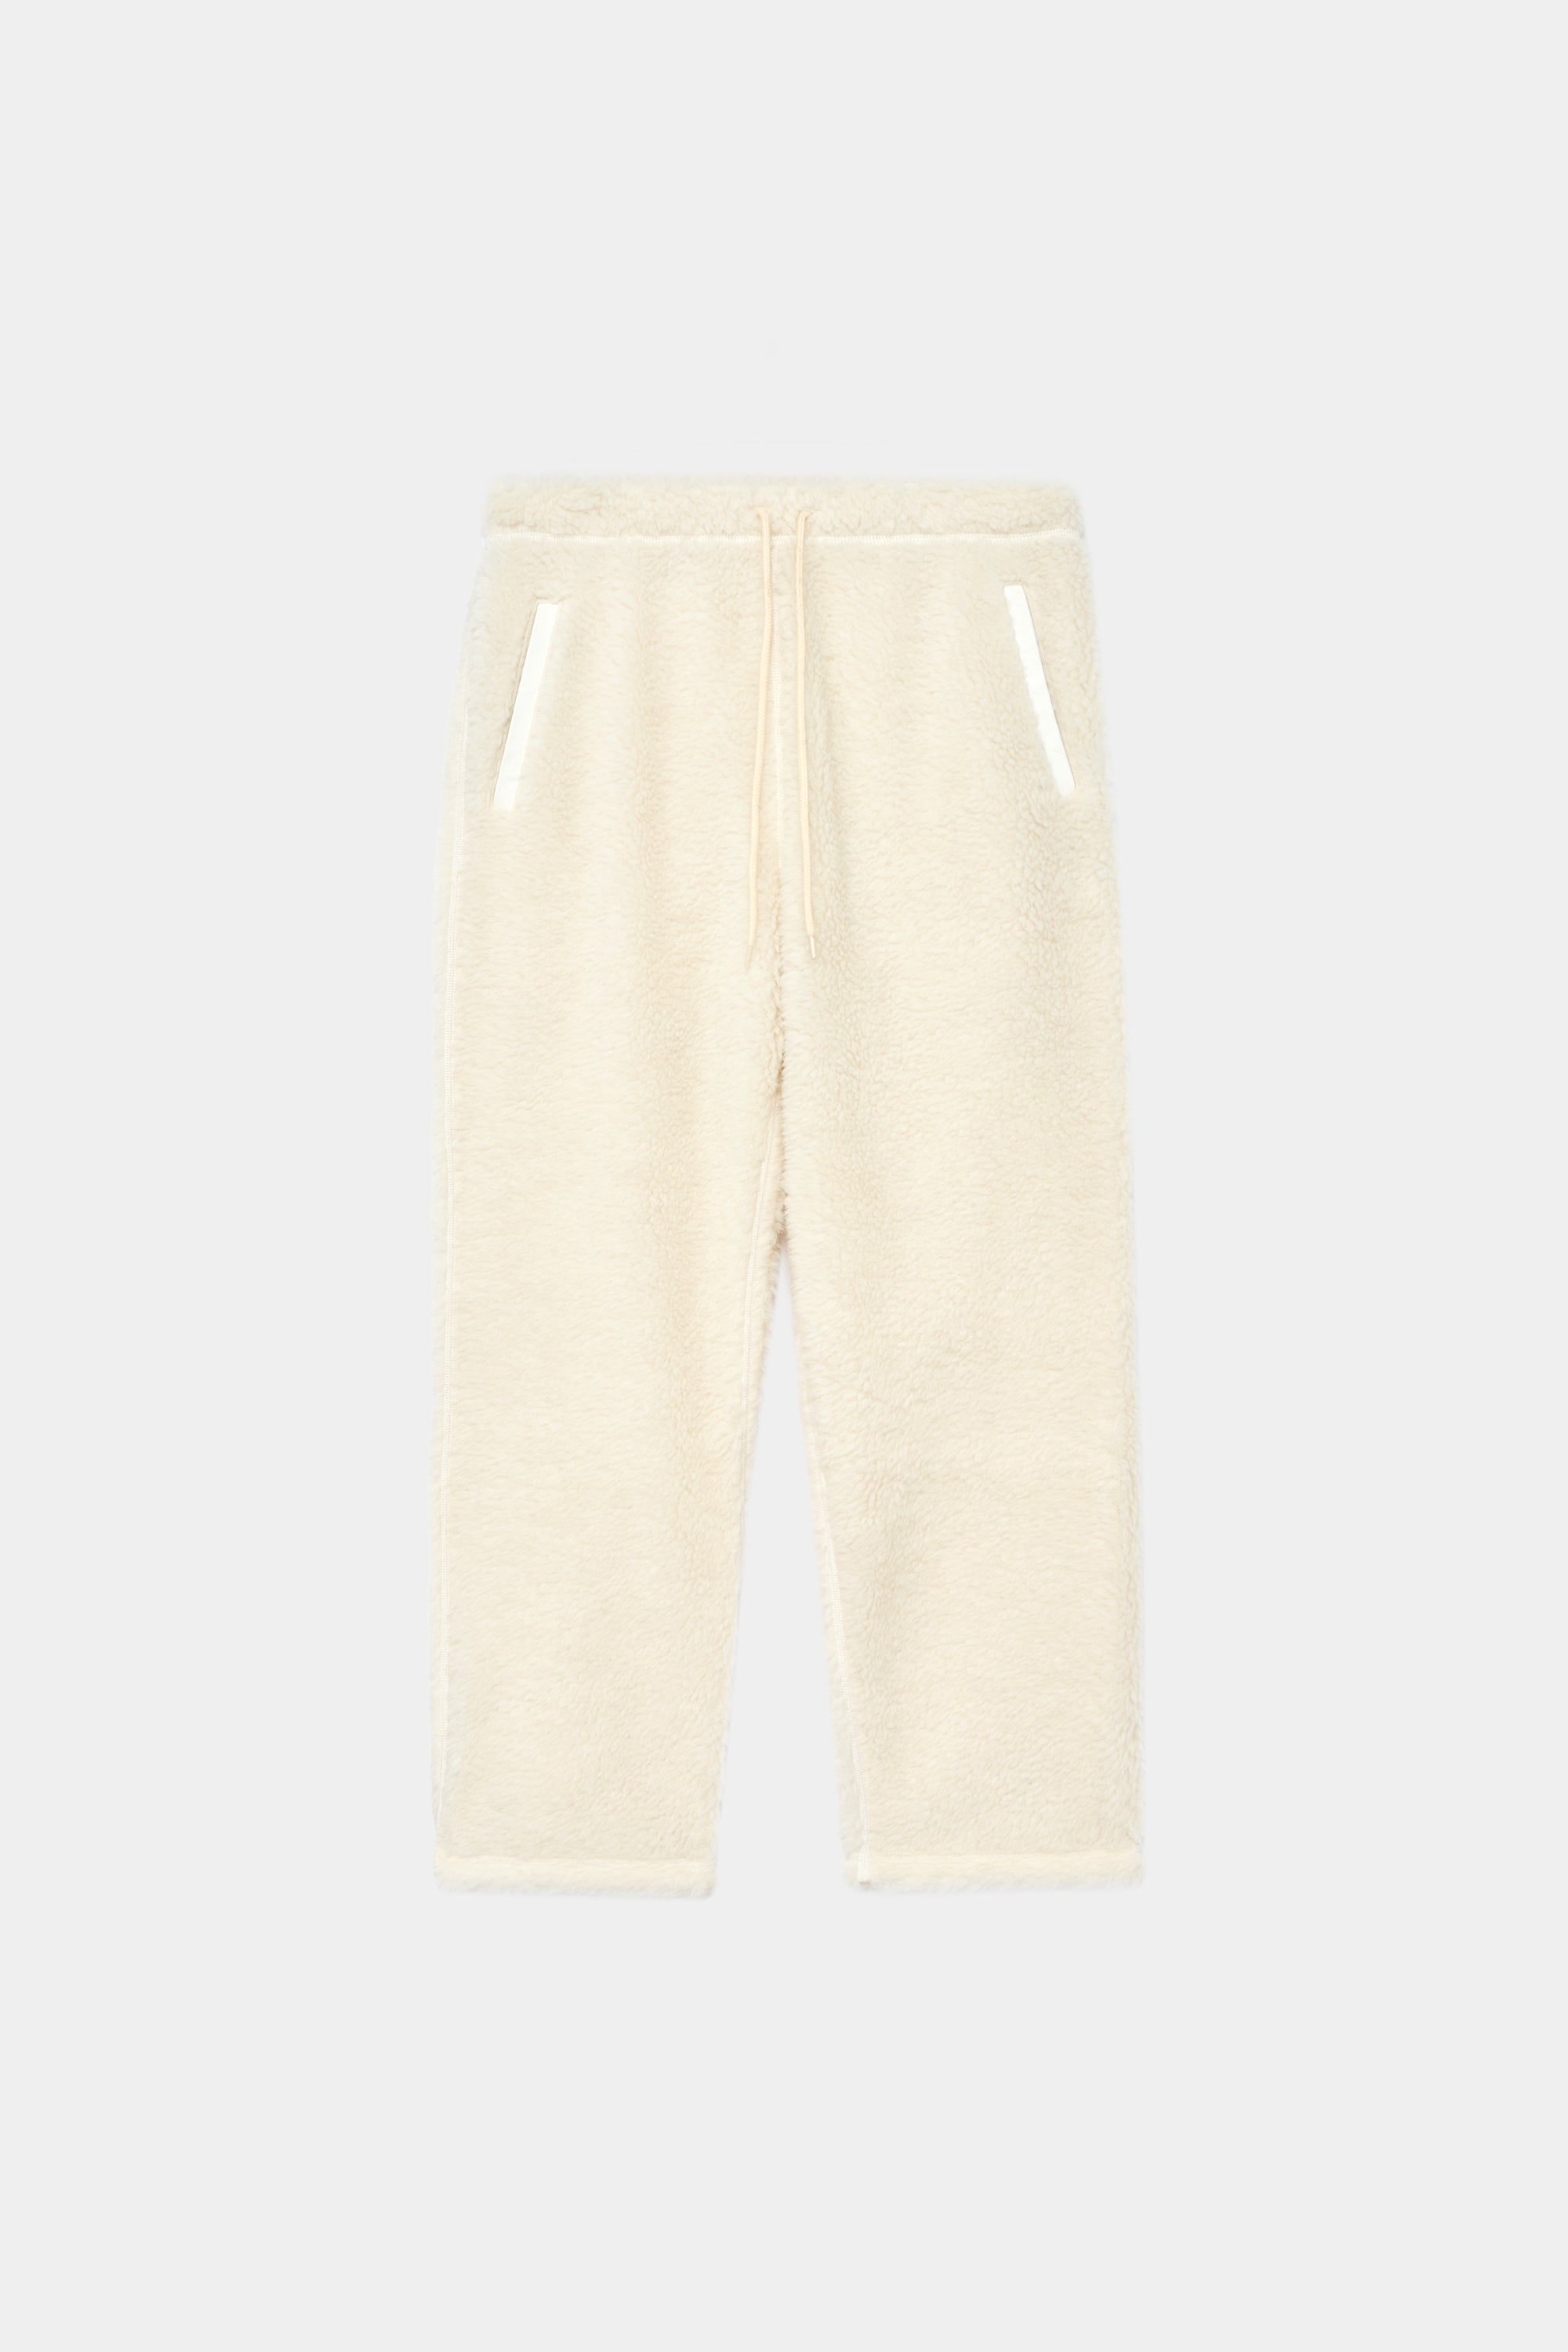 Natural Color Alpaca Fleece Sports Trousers, Natural White